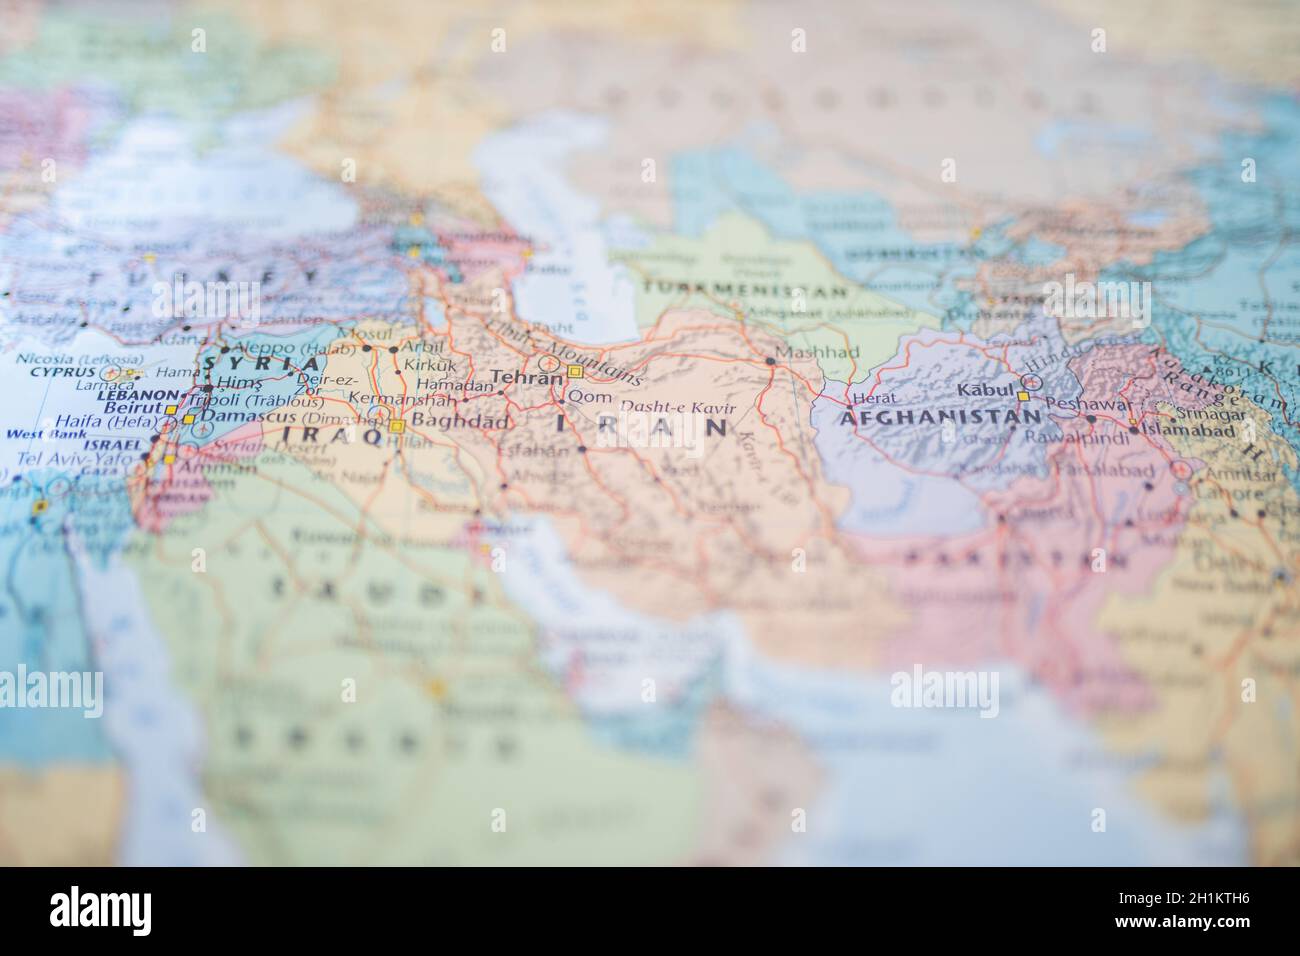 Picture of Syria, Iraq, Iran and Afganistan on a Blurry and Colorful Middle East Map Stock Photo